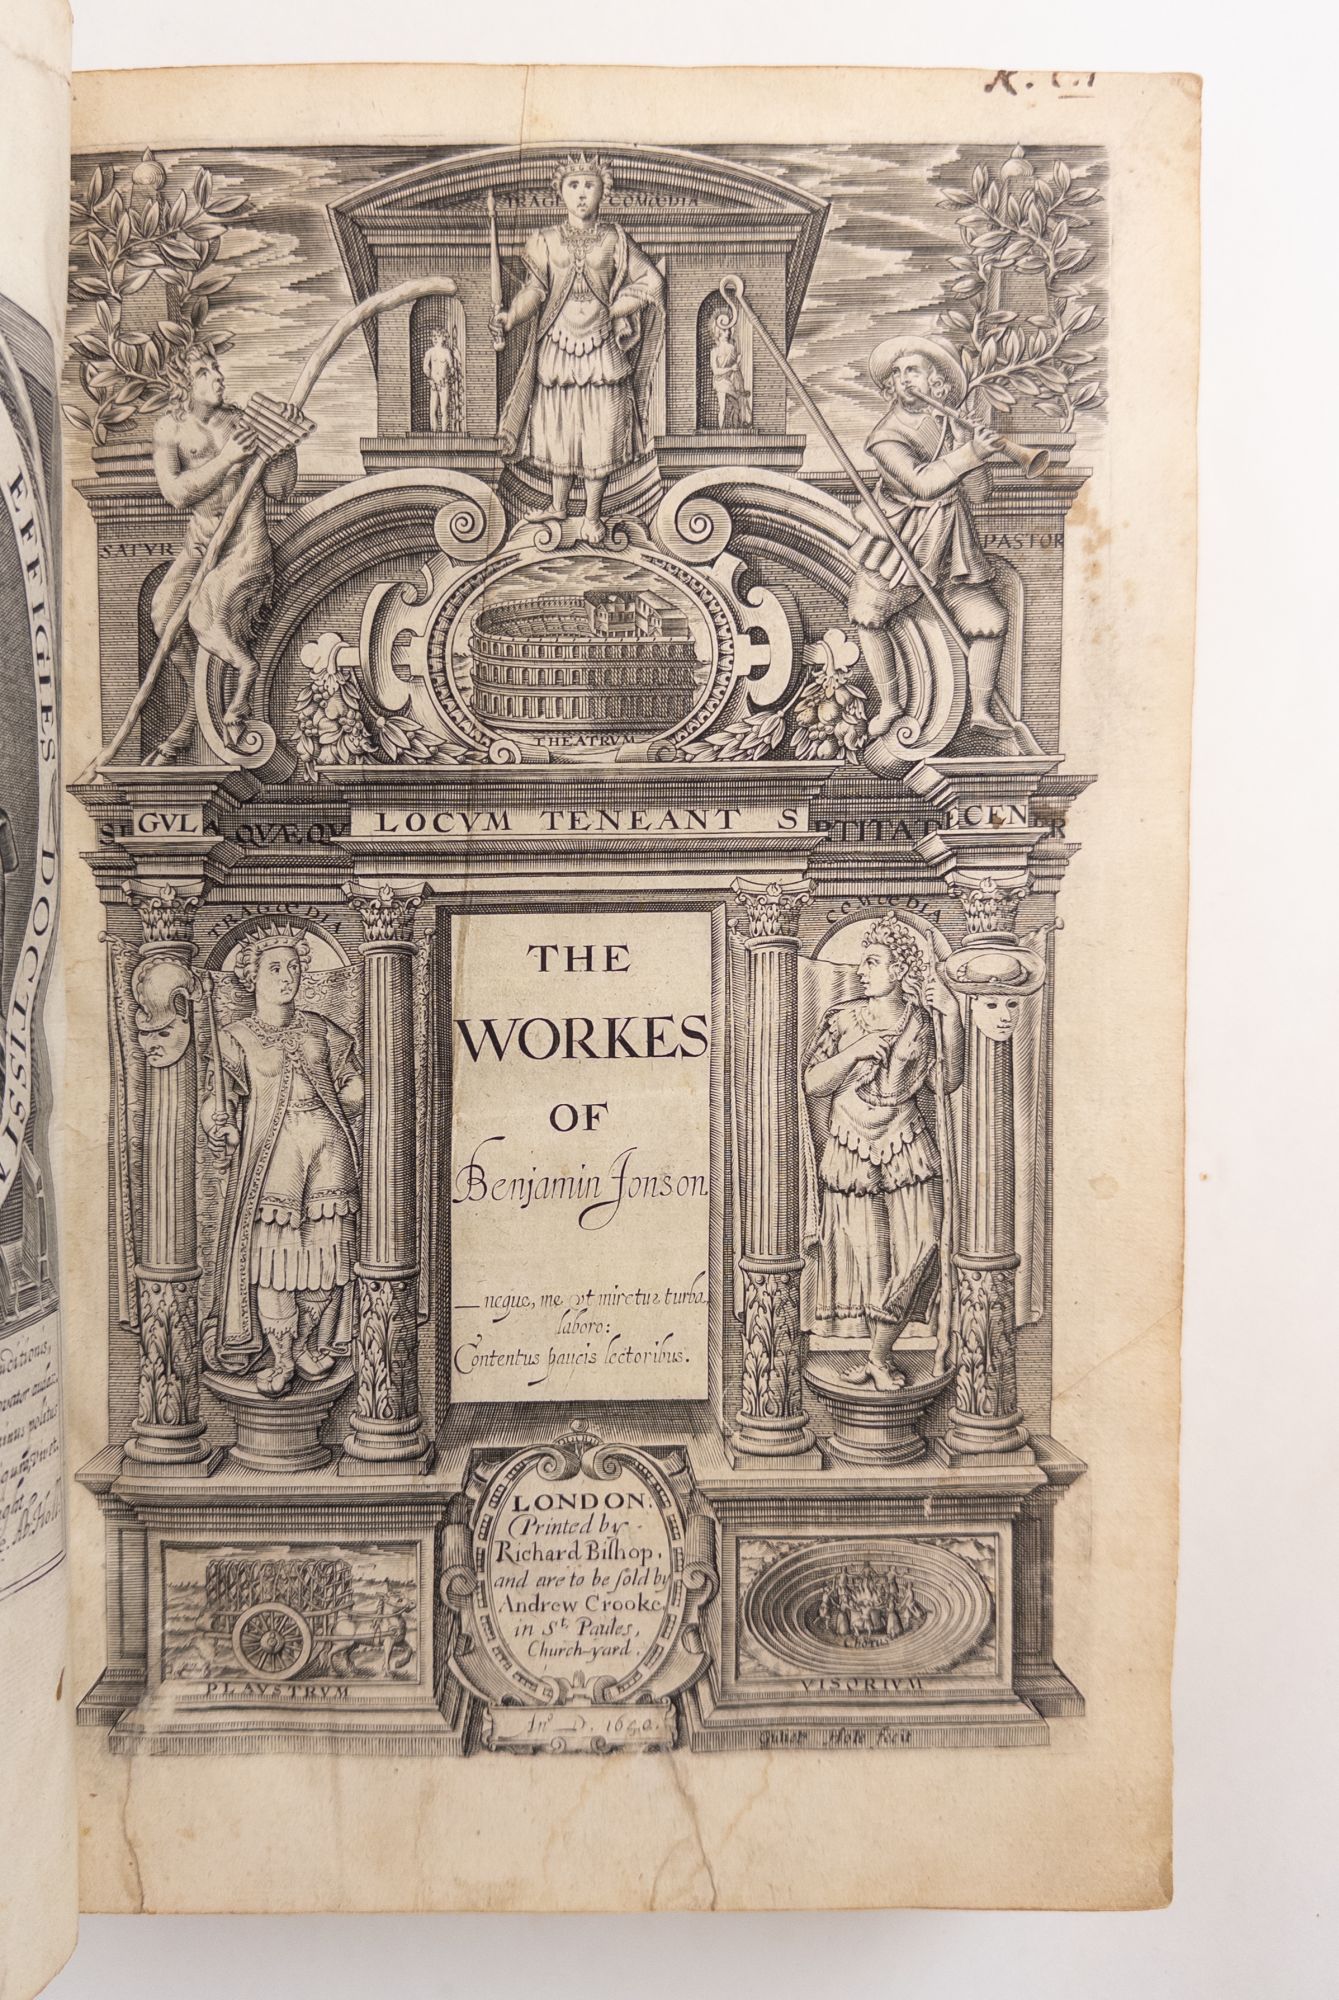 Product Image for THE WORKES OF BENJAMIN JONSON [Two volumes]